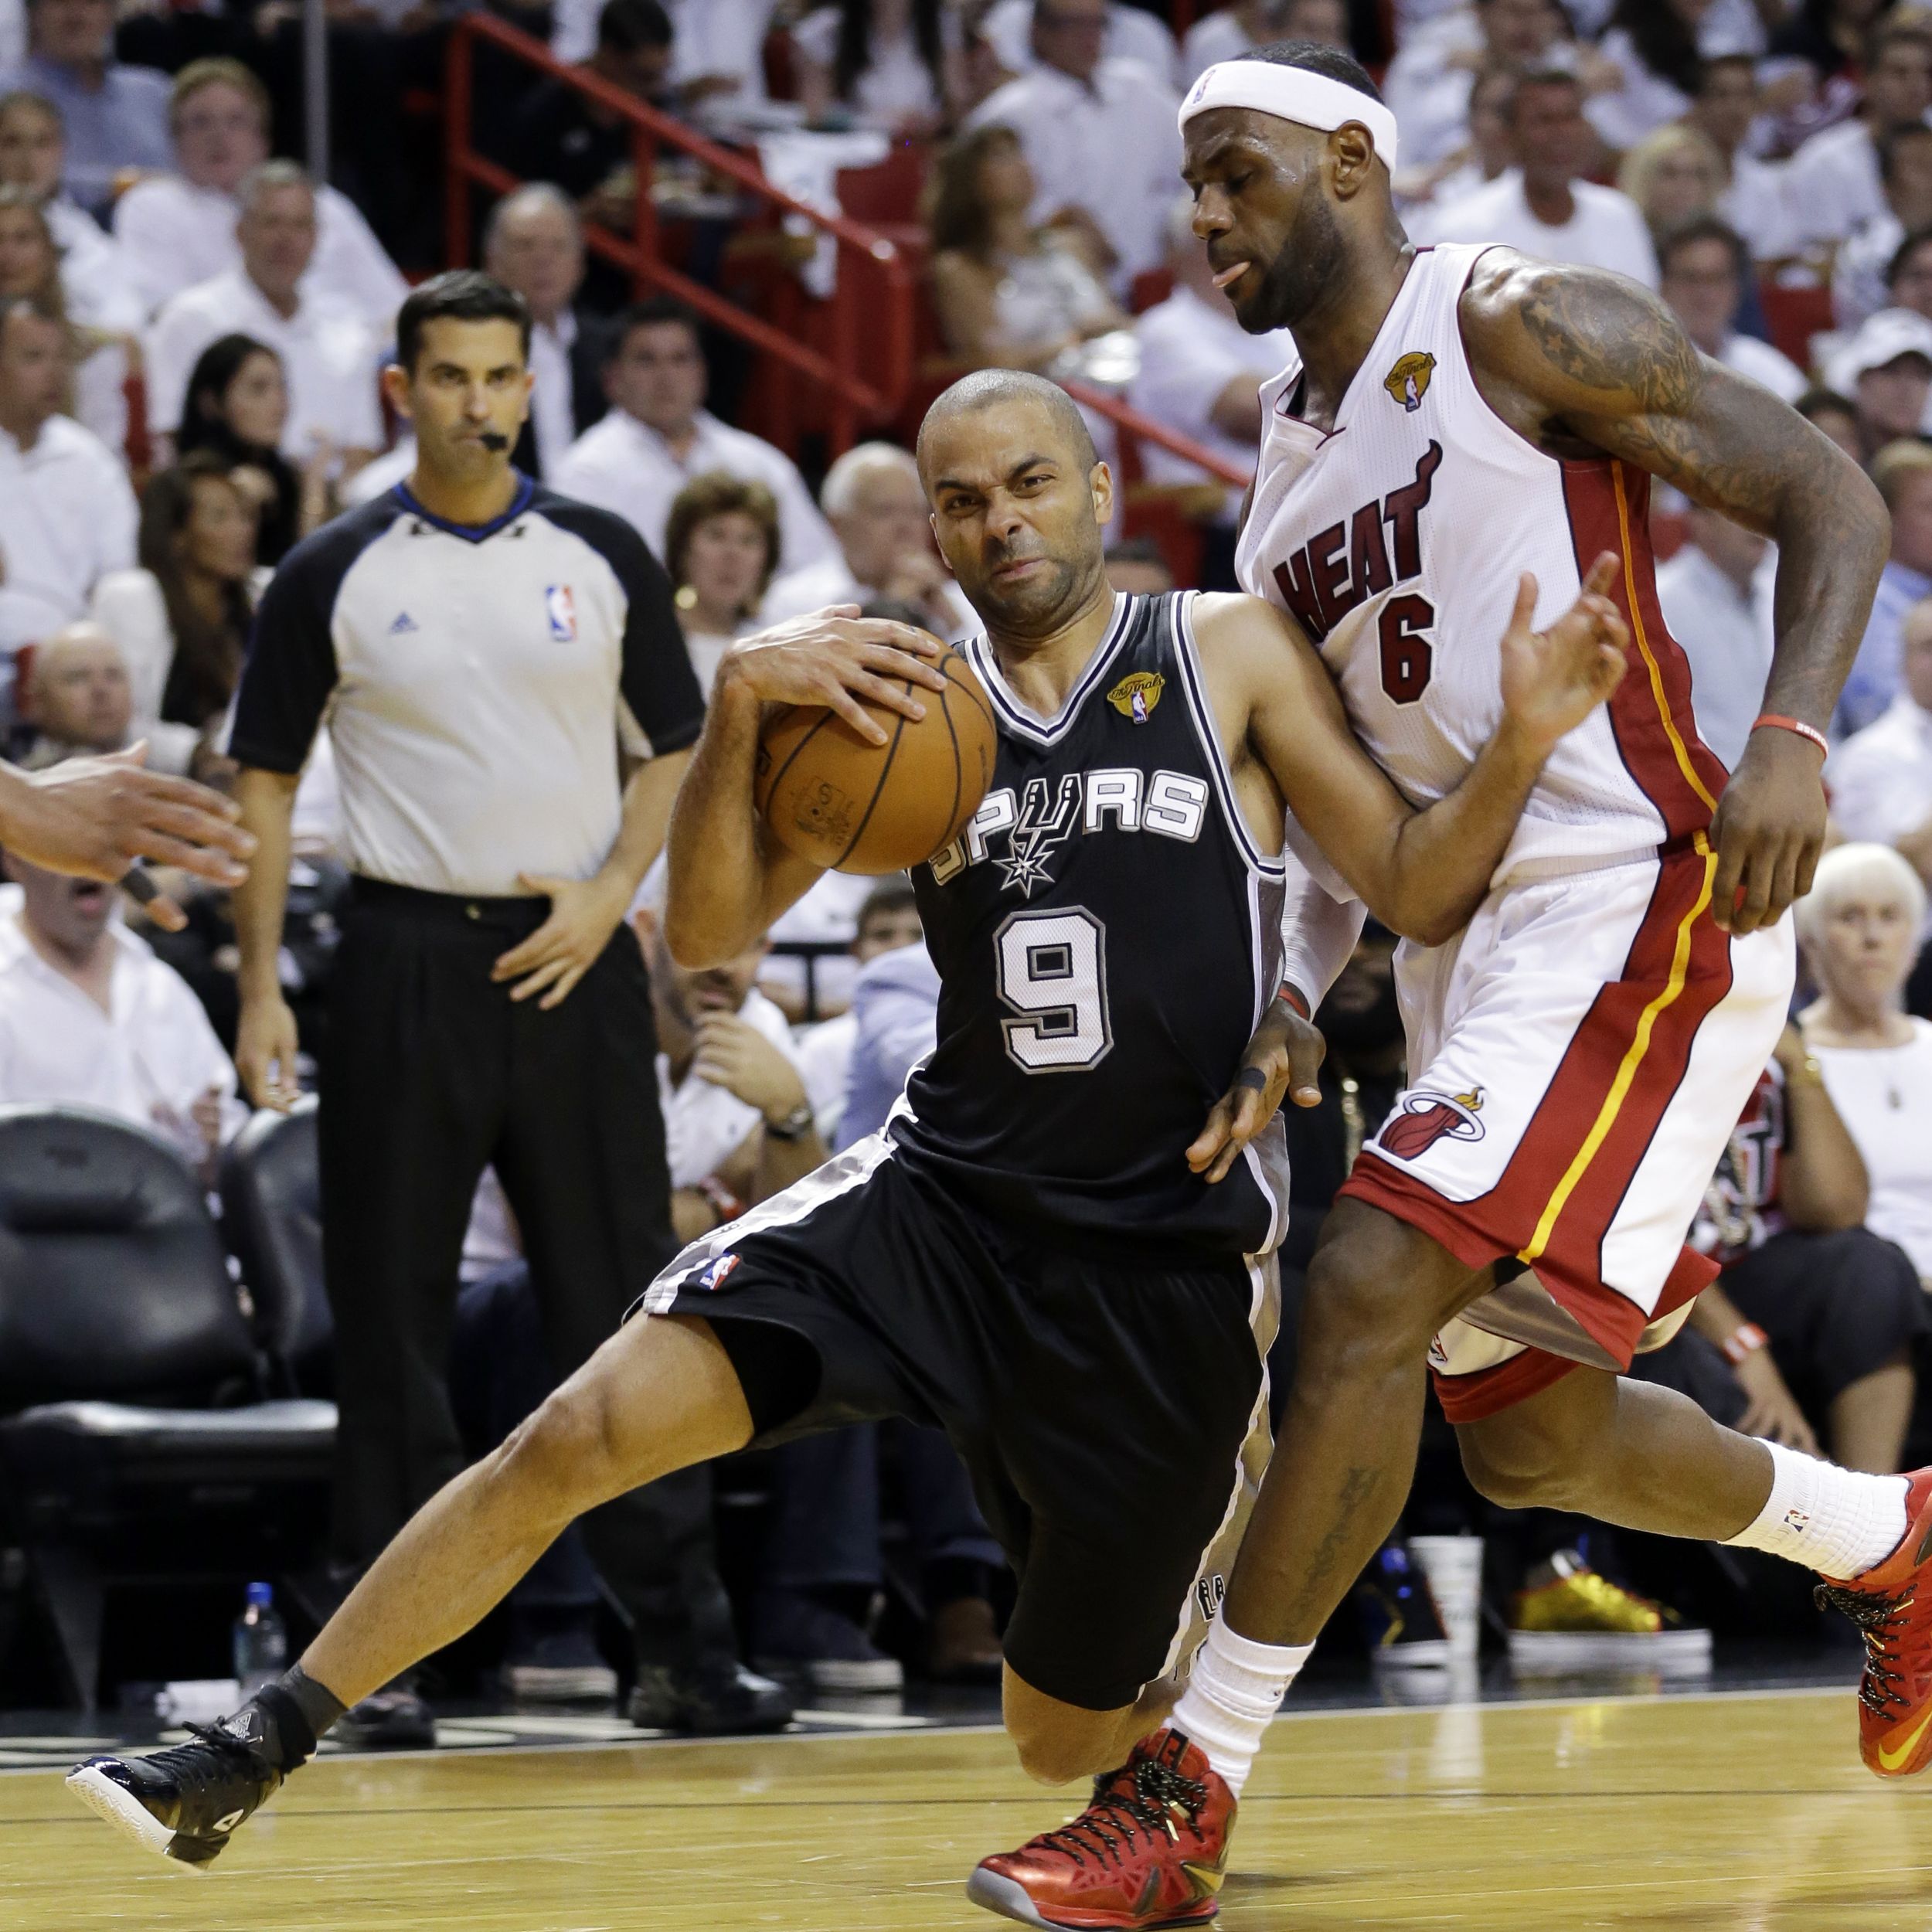 Why The 2014 NBA Finals Was Good For NBA